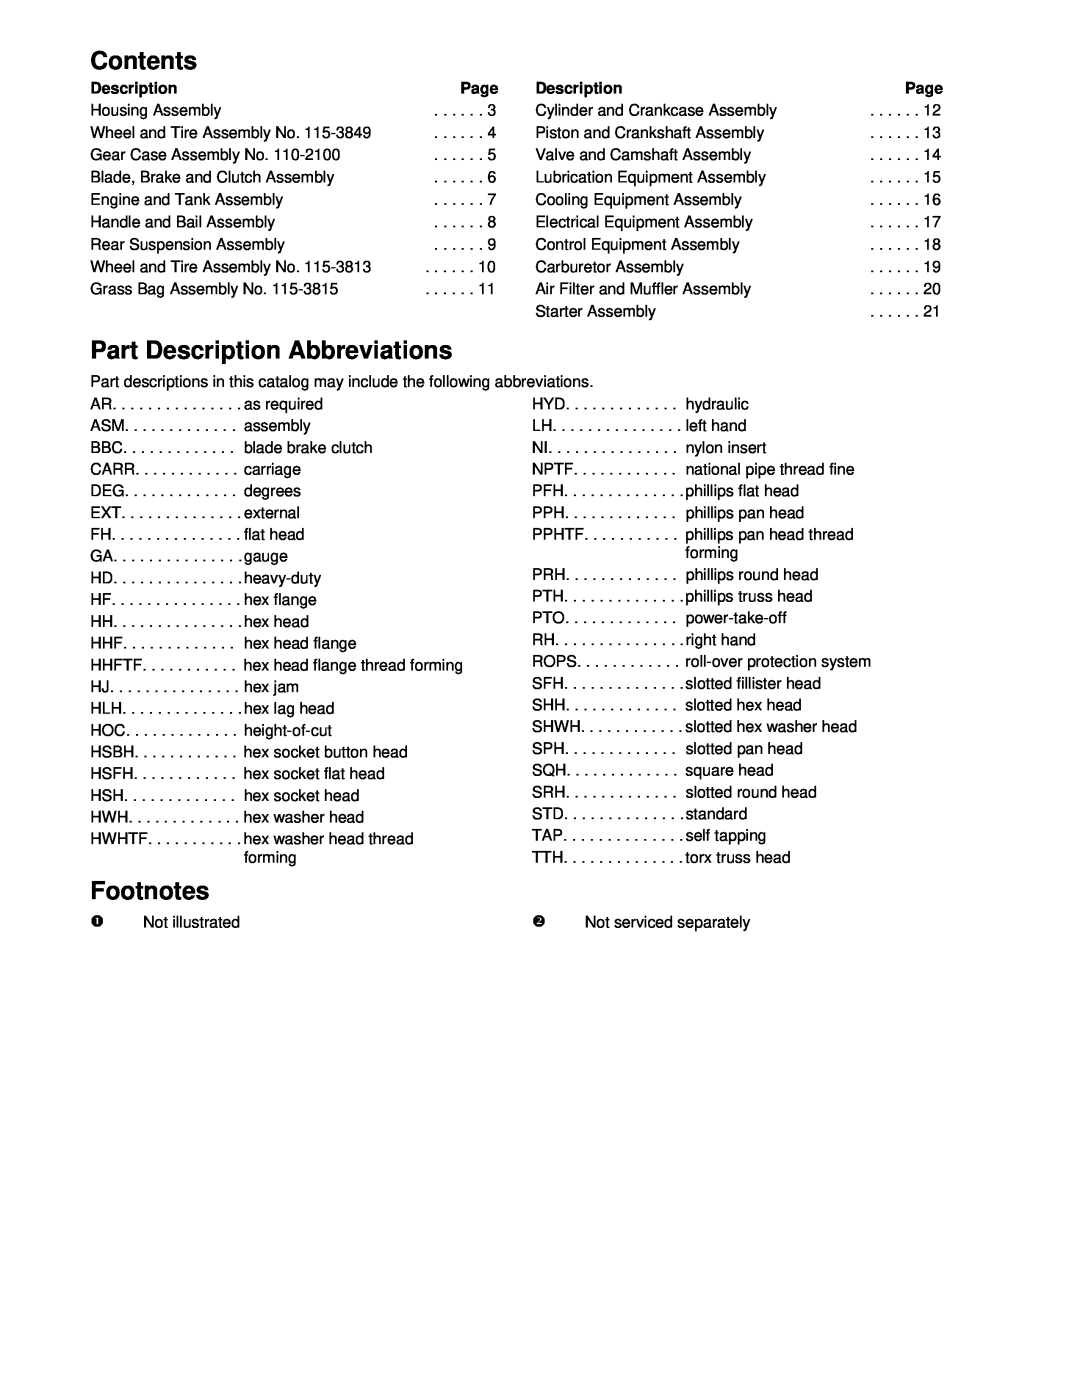 Hayter Mowers G002741 manual Page, Contents, Part Description Abbreviations, Footnotes 